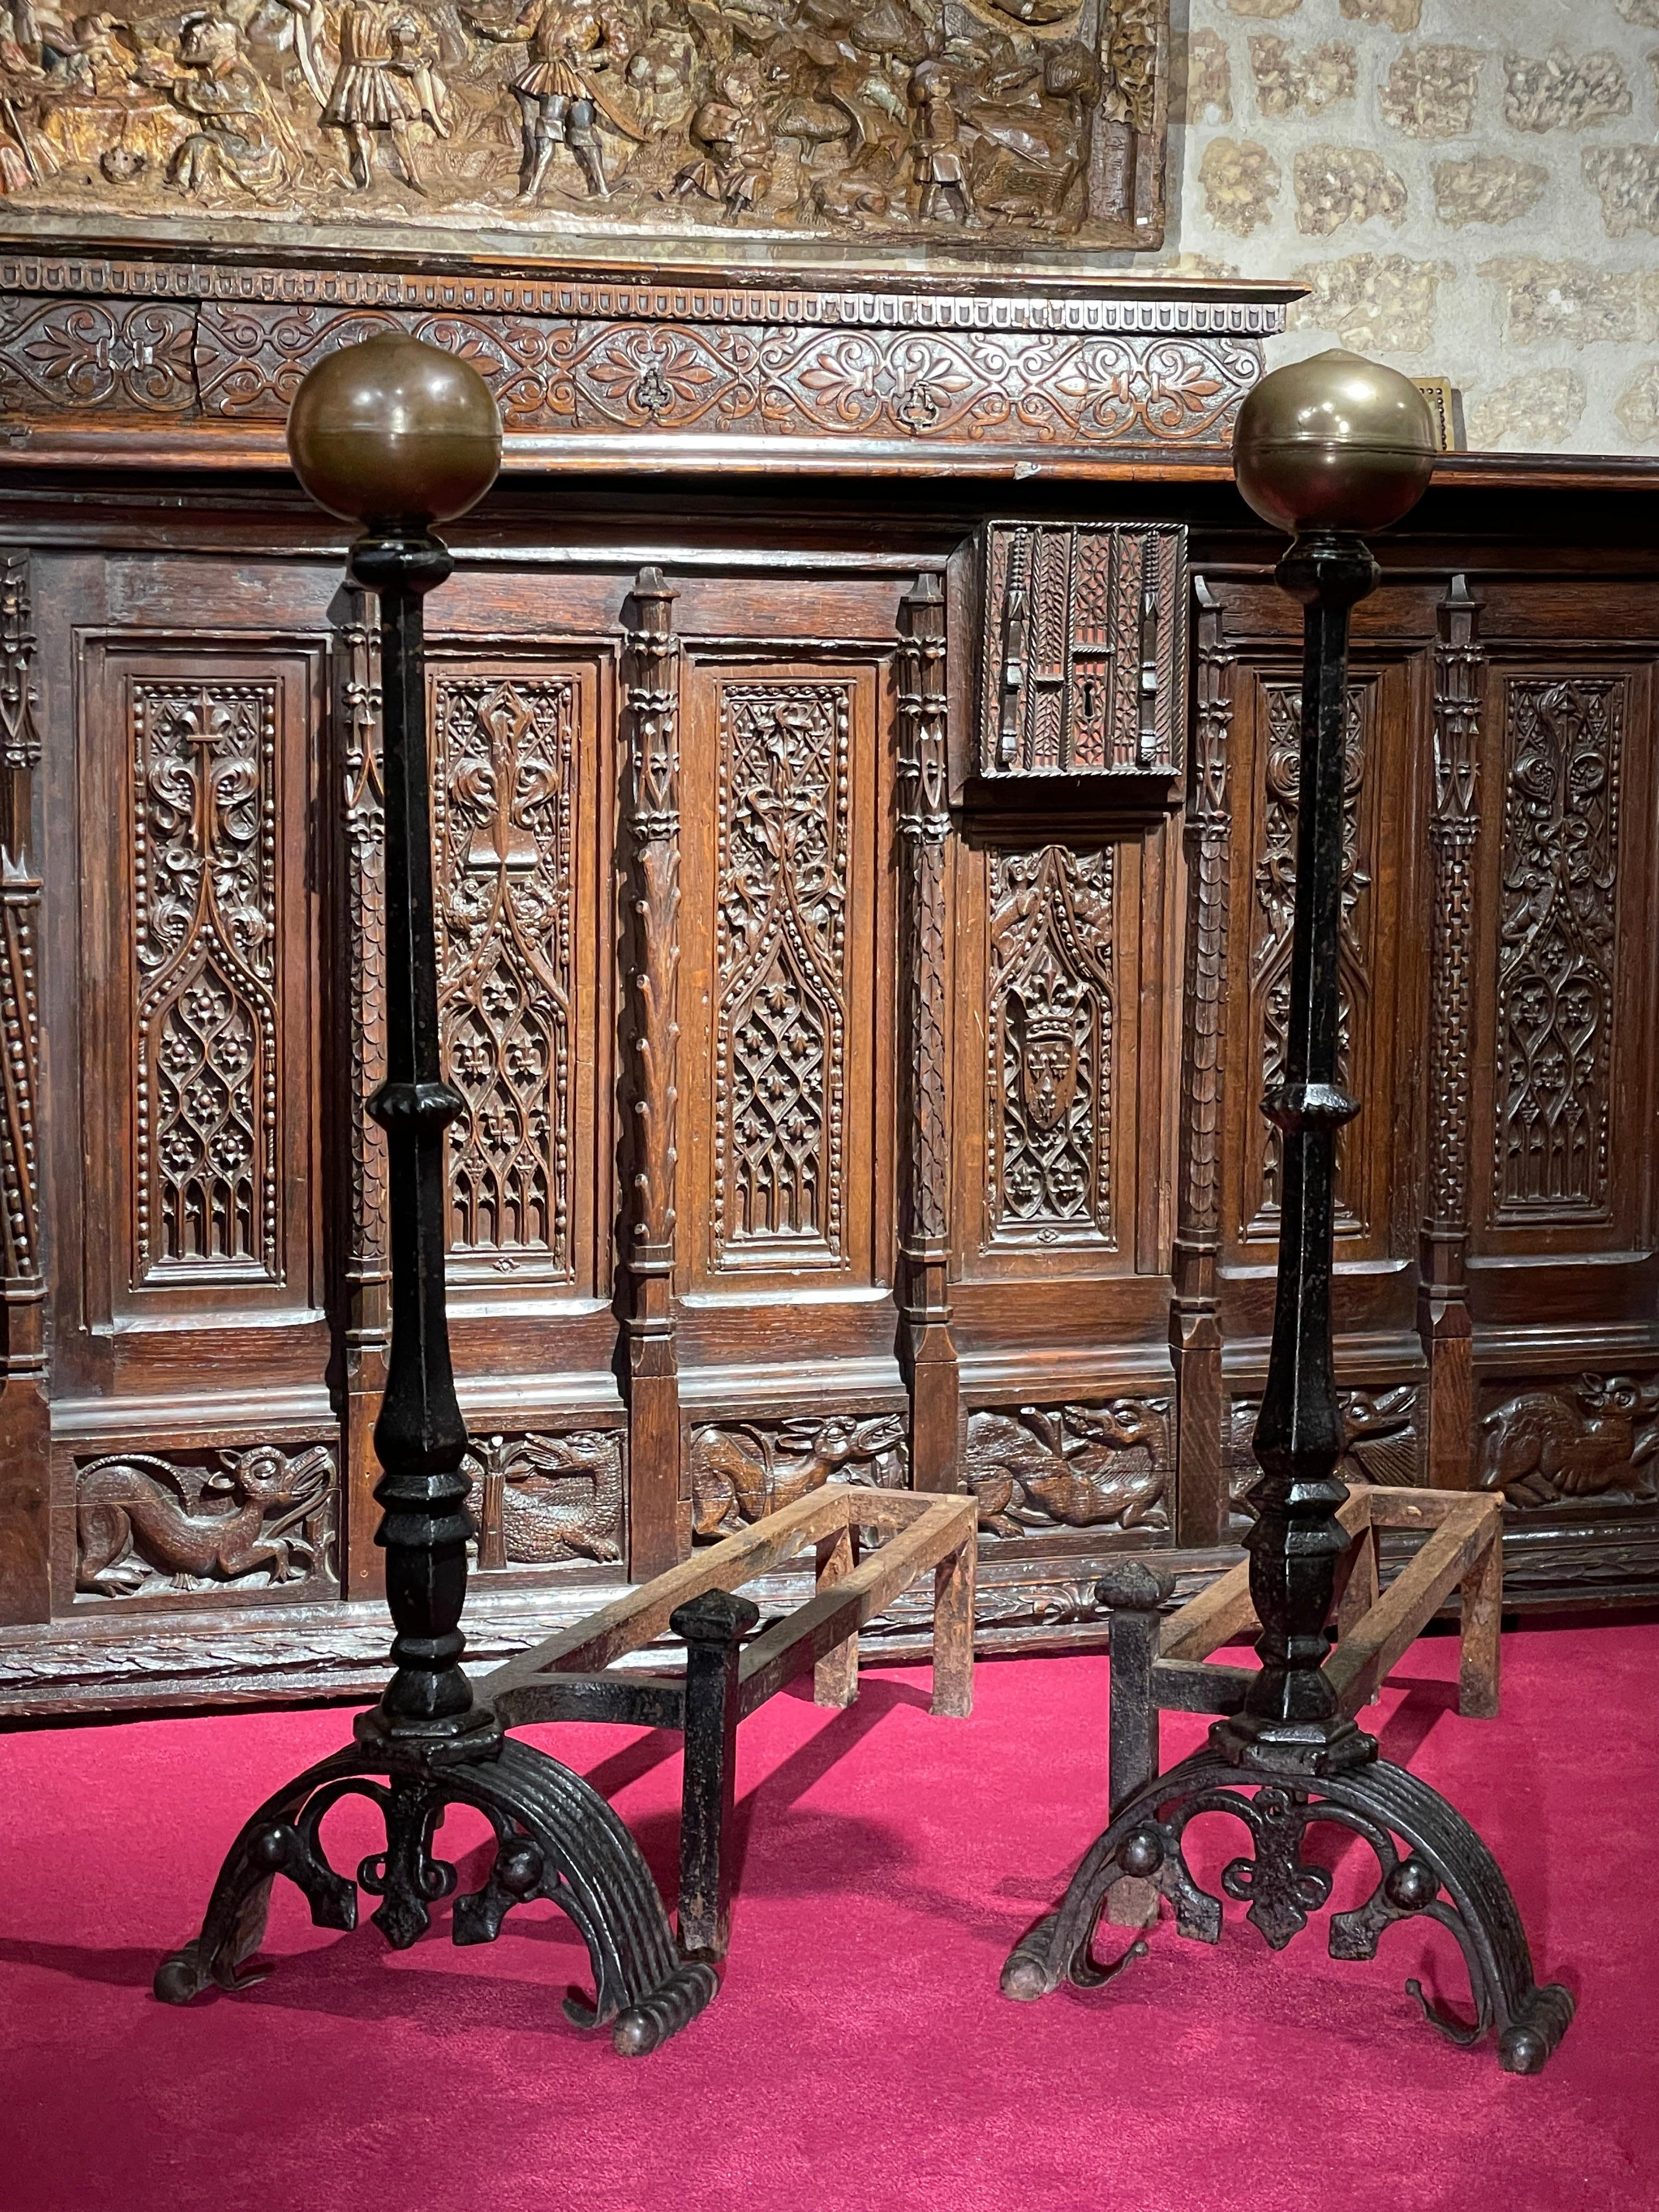 PAIR OF LARGE FLORENTINE WROUGHT IRON ANDIRONS FROM THE GOTHIC PERIOD


ORIGIN: ITALY, FLORENCE
PERIOD: GOTHIC PERIOD, 15th CENTURY

Height:  95 cm
Length: 74 cm
Depth: 31,5 cm

Wrought iron and gilded bronze


This is a rare pair of andirons with